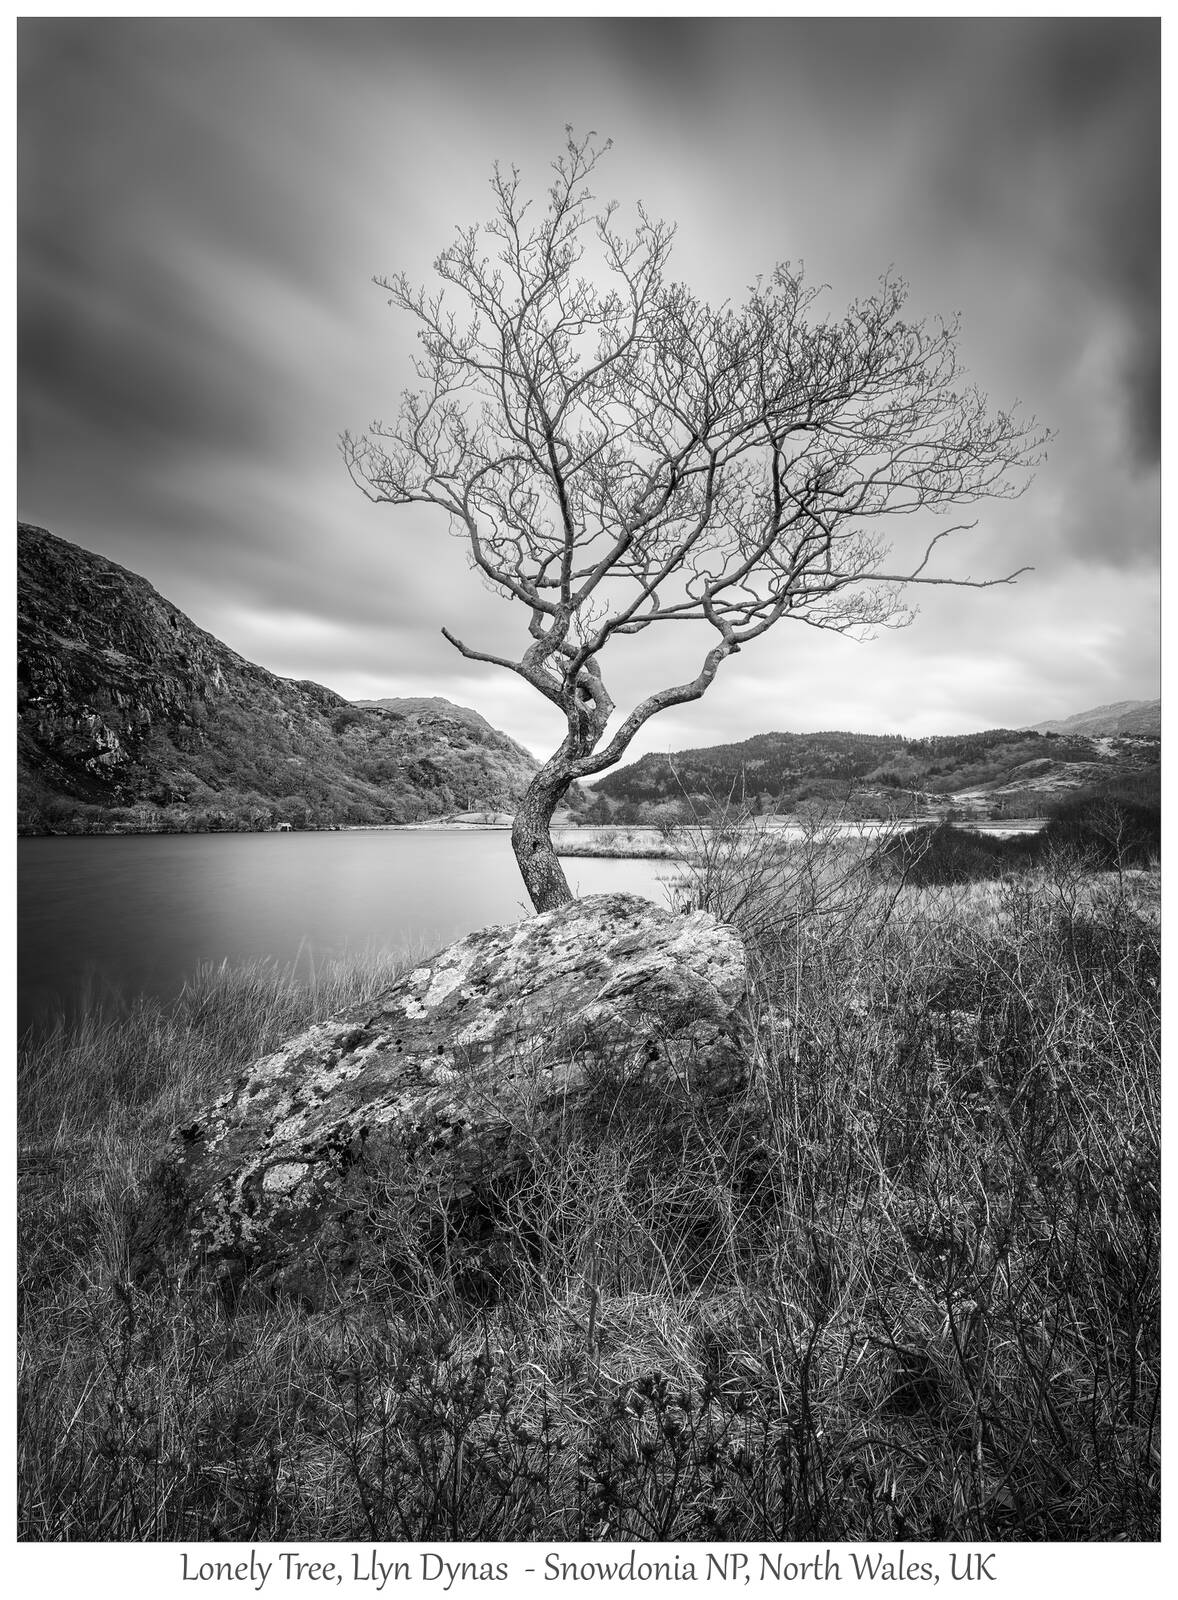 Image of Llyn Dinas, Snowdonia by Walter Roeck